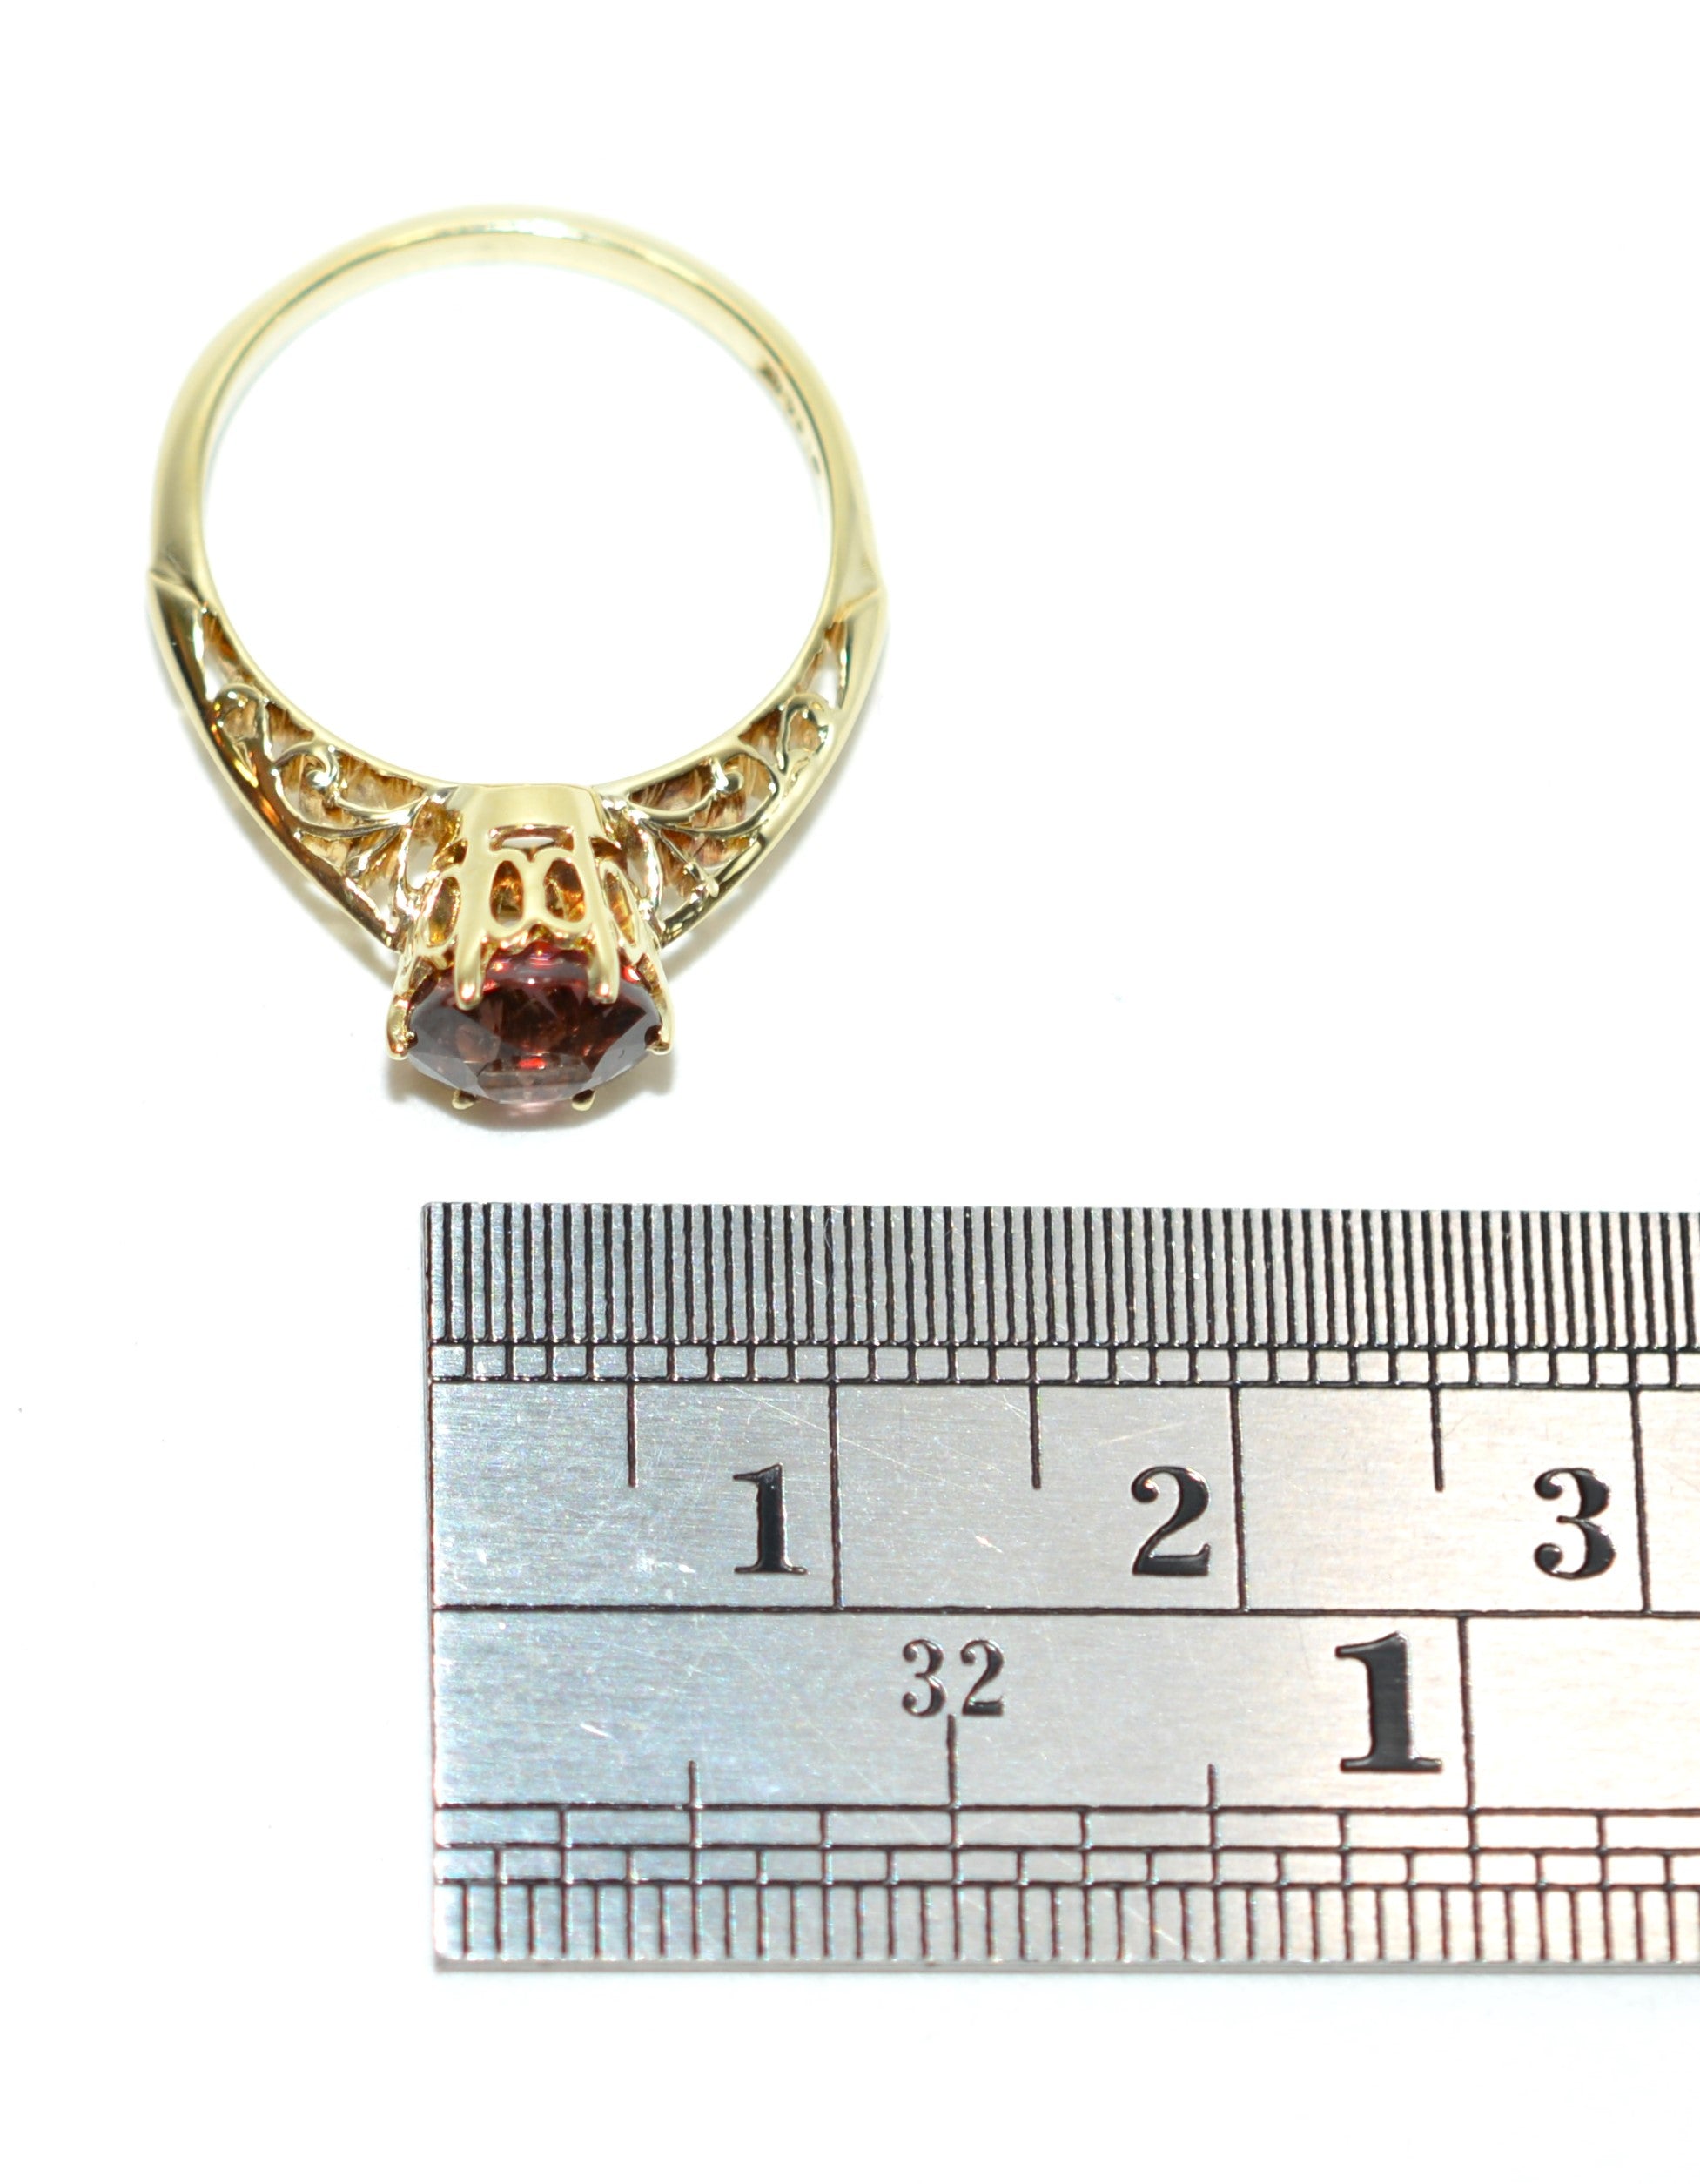 Natural Malaia Malaya Garnet Ring 14K Solid Gold 1.32ct Solitaire Ring Engagement Ring Gemstone Ring Womens Ring Estate Jewelry Vintage Fine